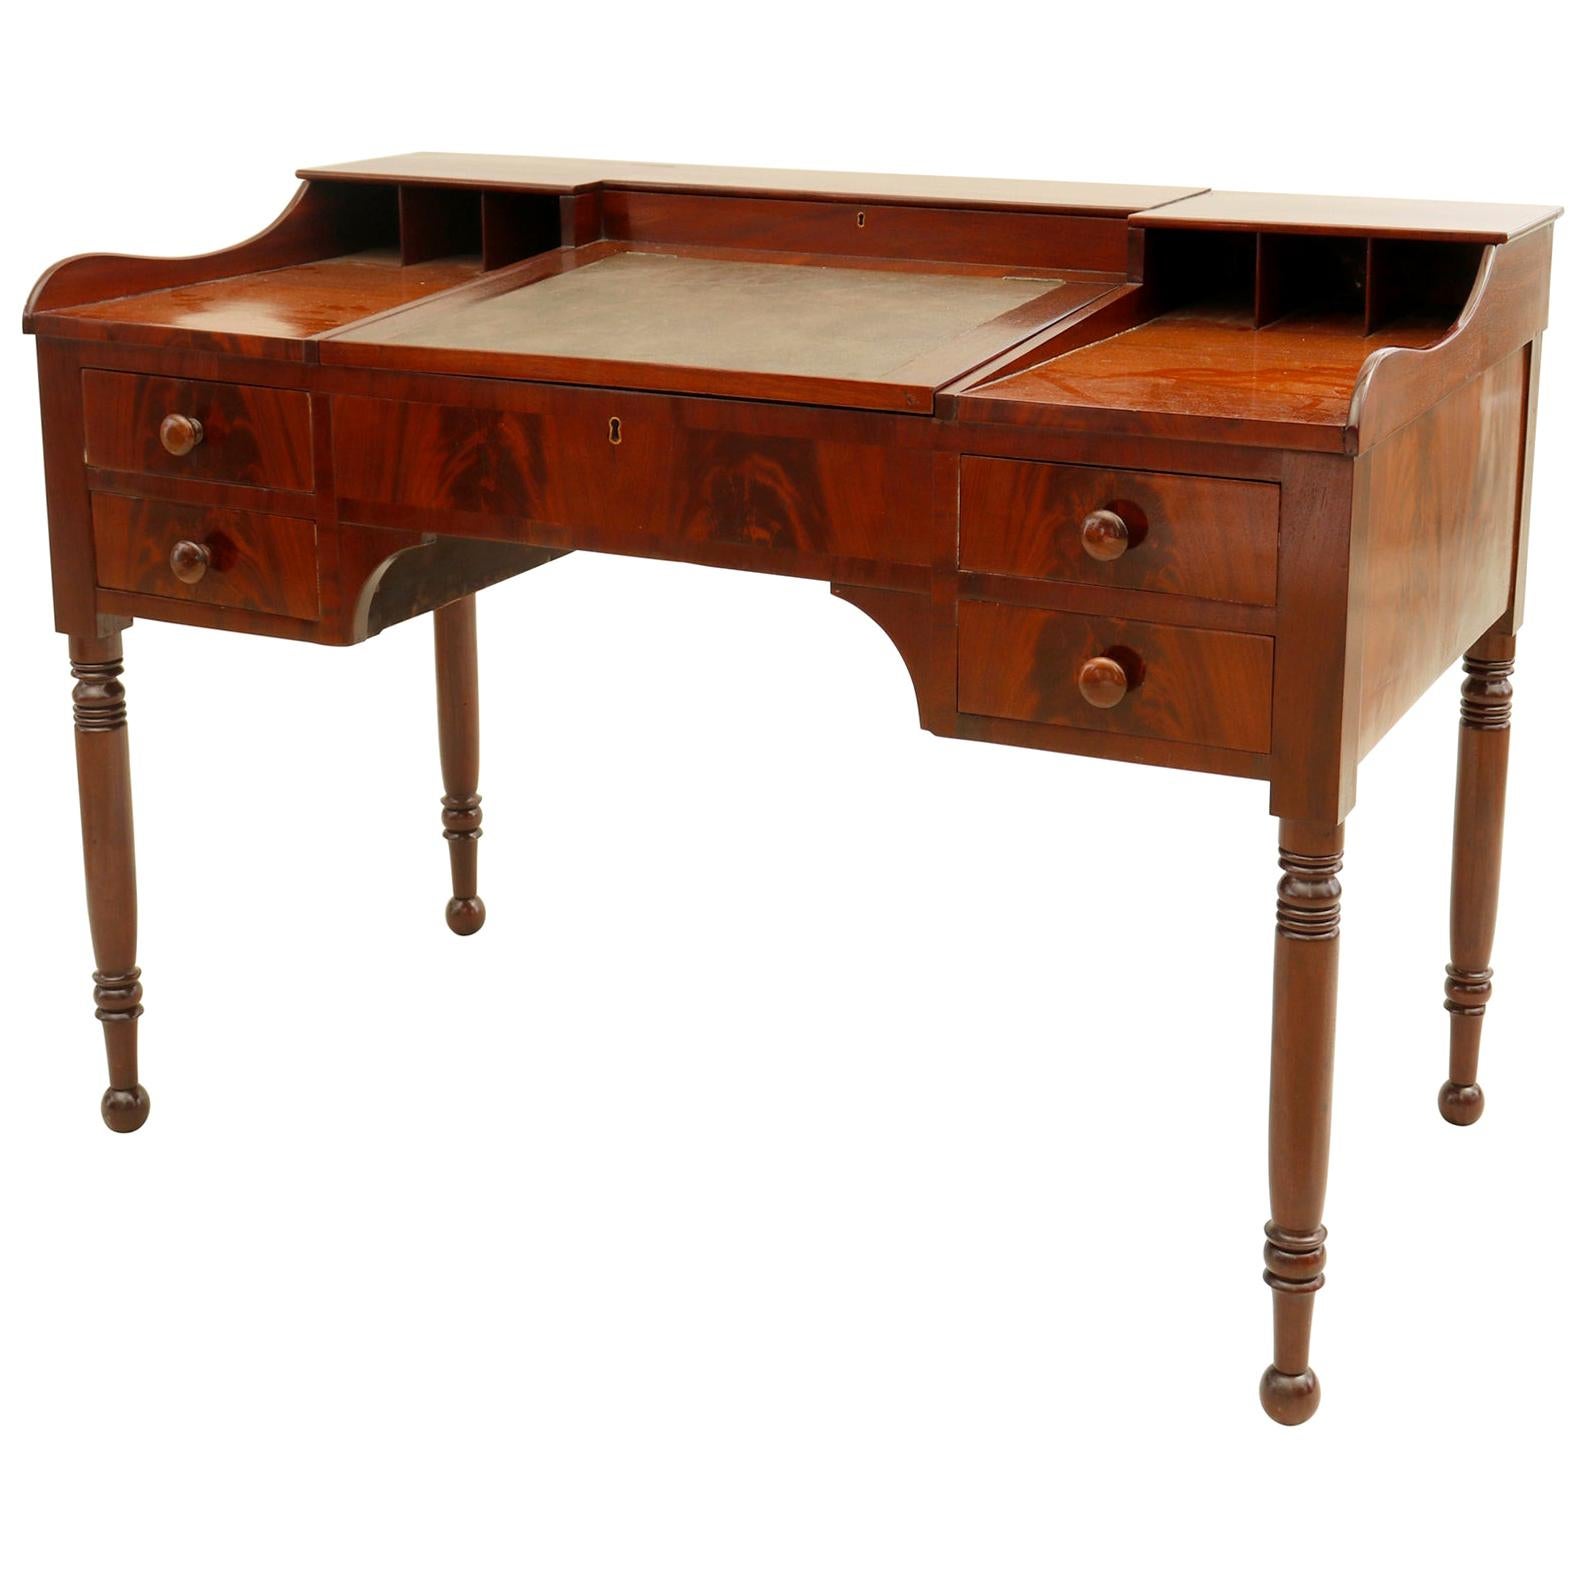 Early 19th Century American Writing Desk